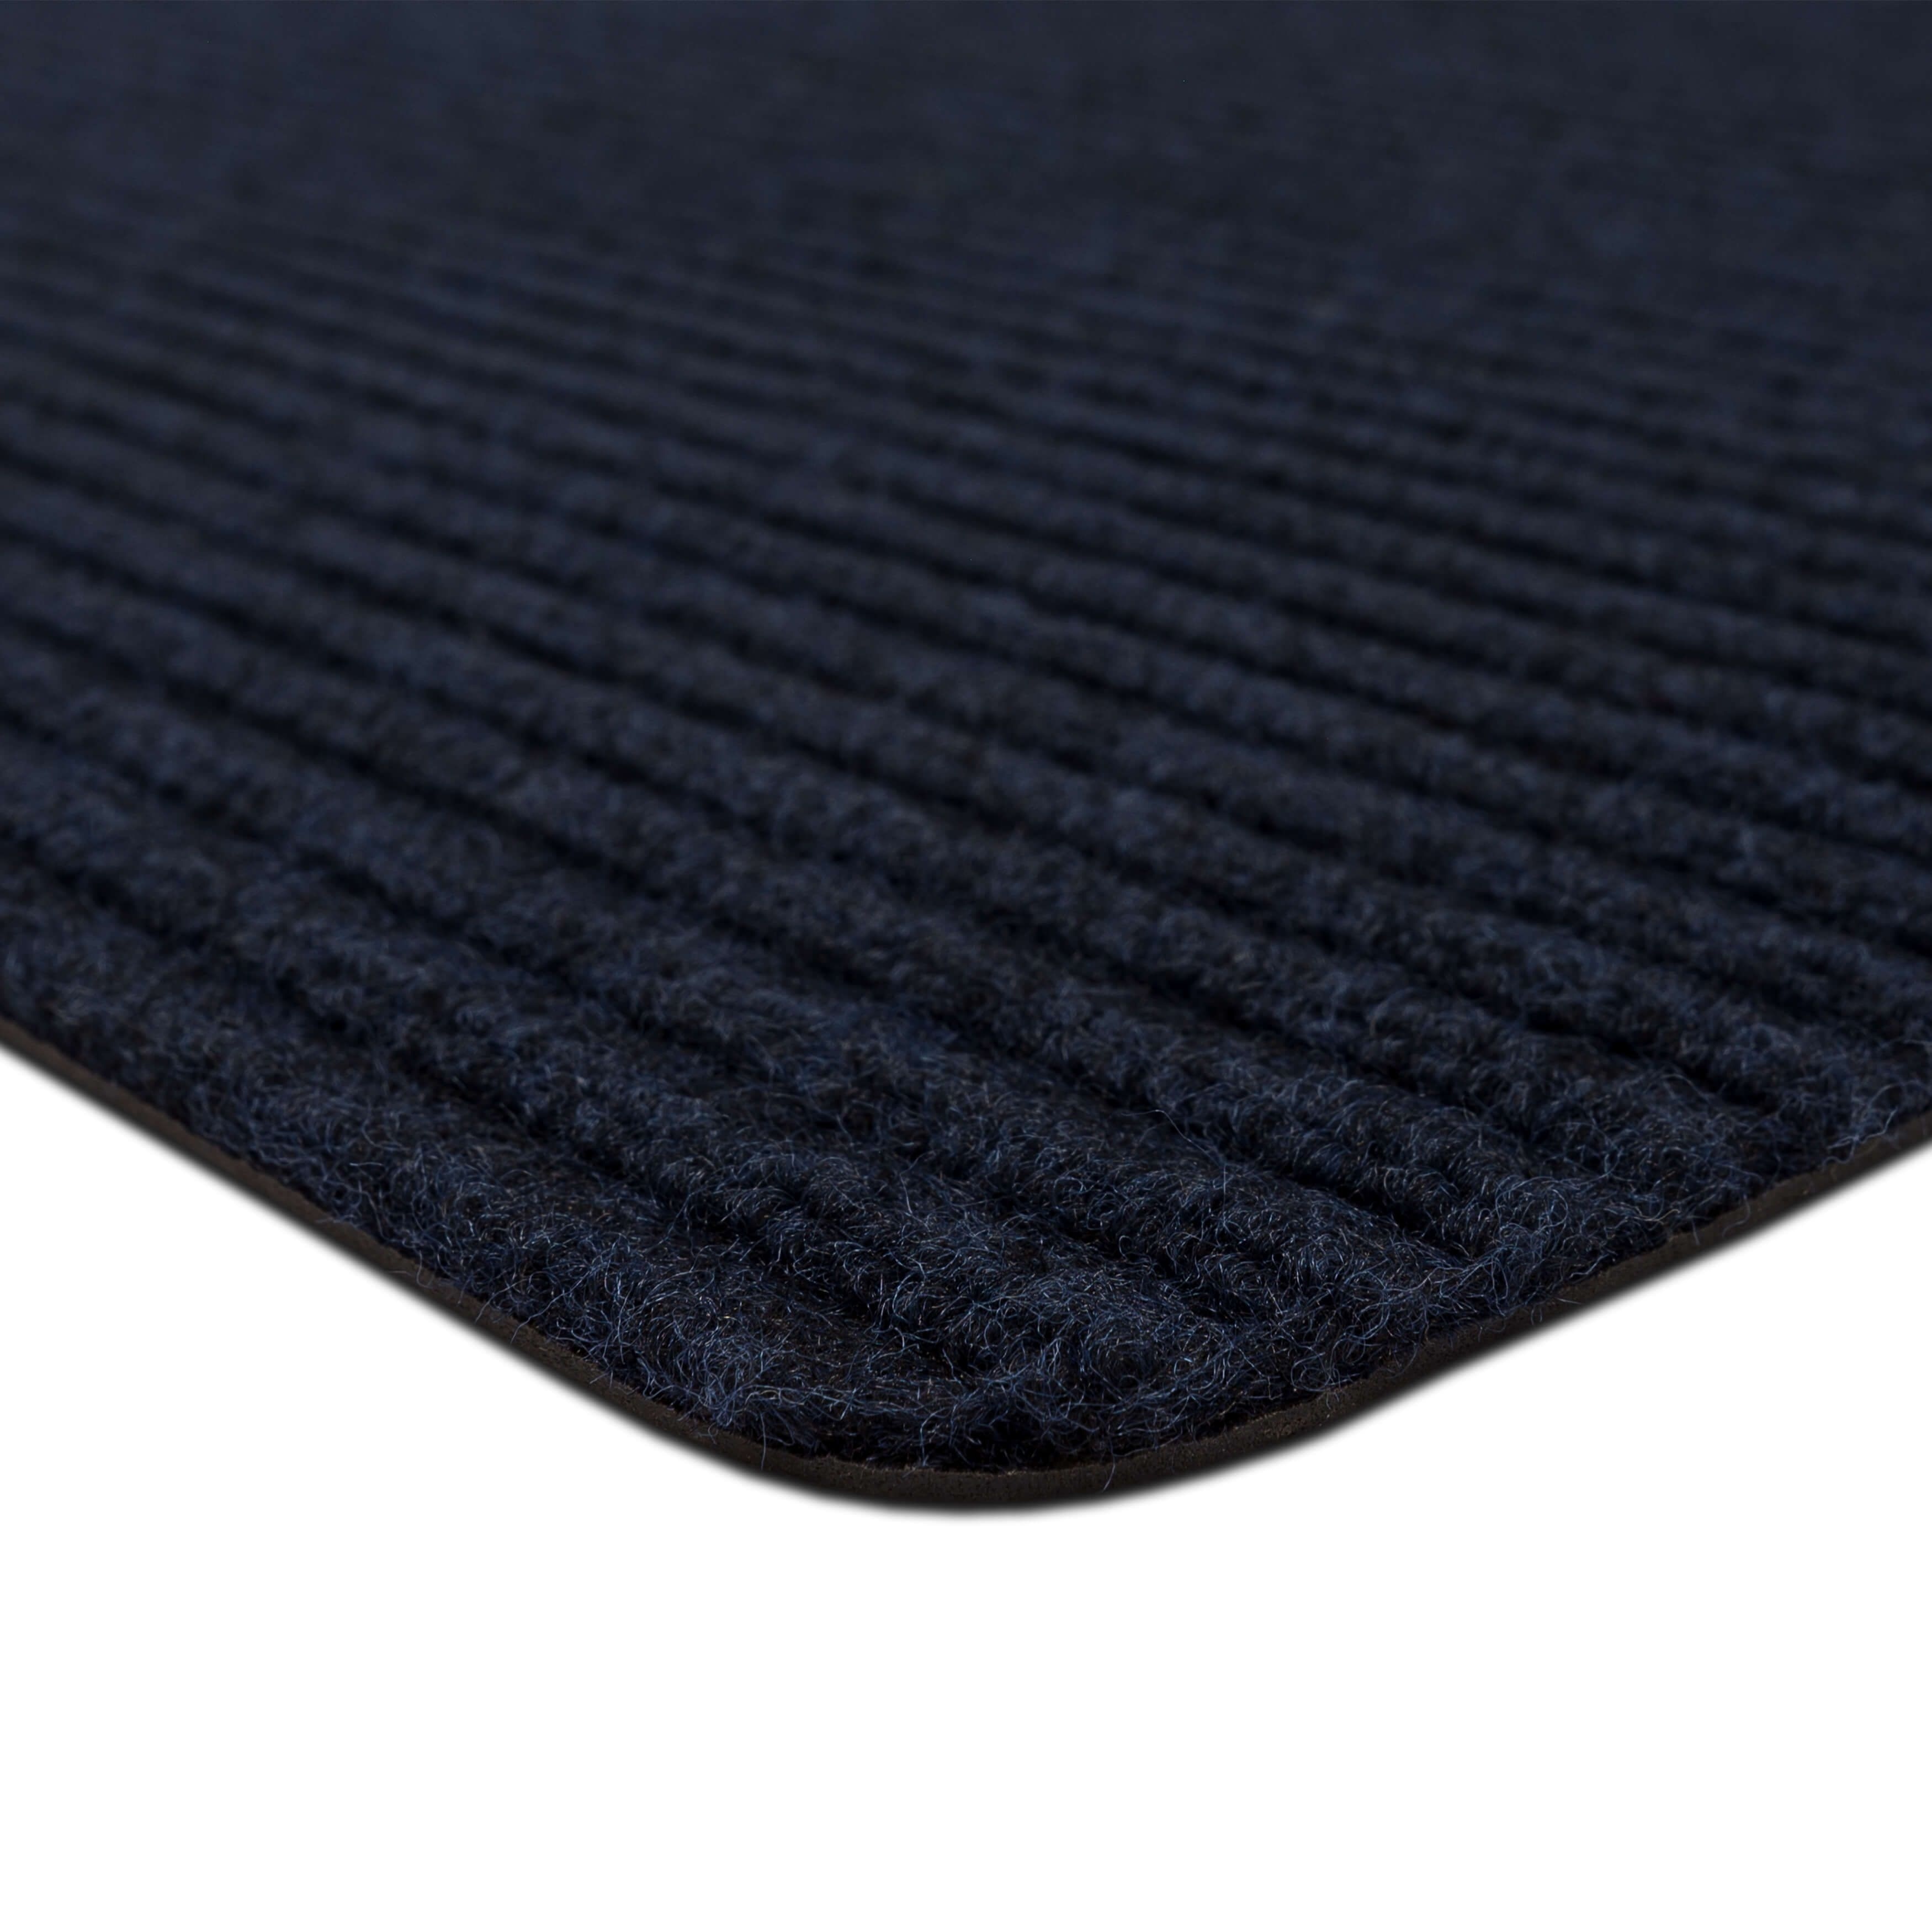 https://ak1.ostkcdn.com/images/products/is/images/direct/c38734ebff6ec36c690896716a834bee1707ed54/Mohawk-Home-Utility-Floor-Mat-for-Garage%2C-Entryway%2C-Porch%2C-and-Laundry-Room.jpg